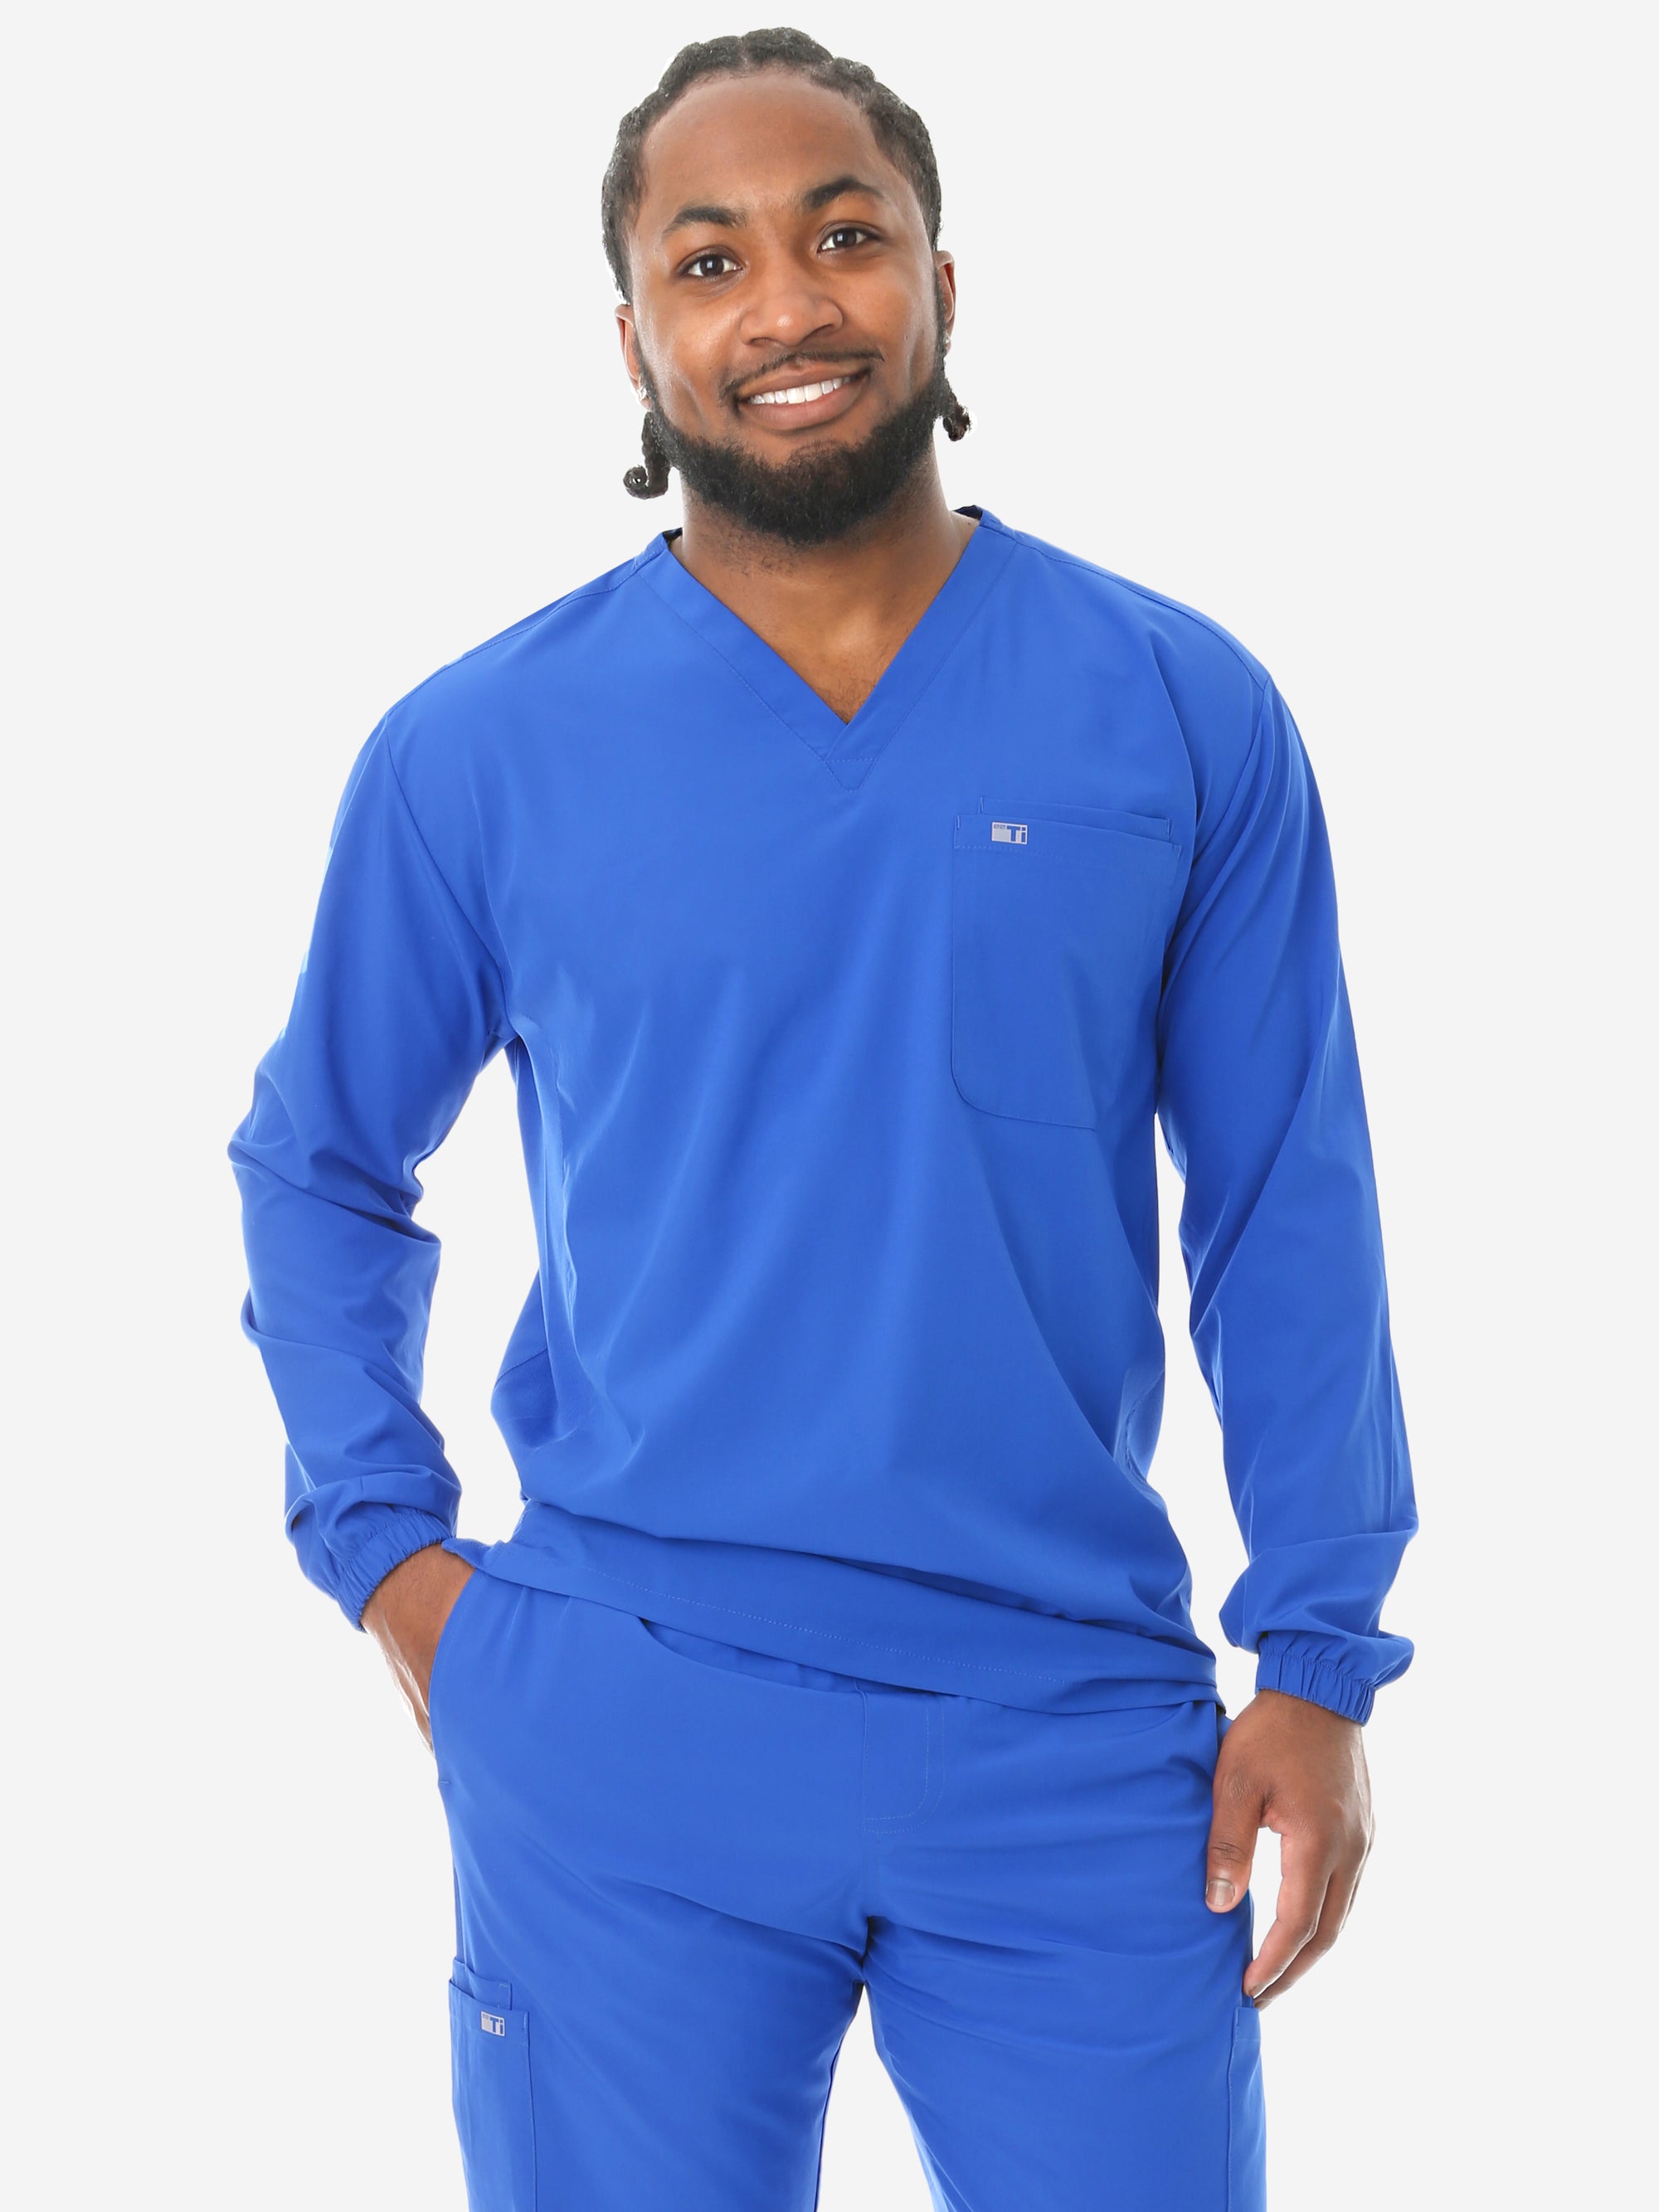 Men's Royal Blue Long-Sleeve Scrub Top Front View Top Only